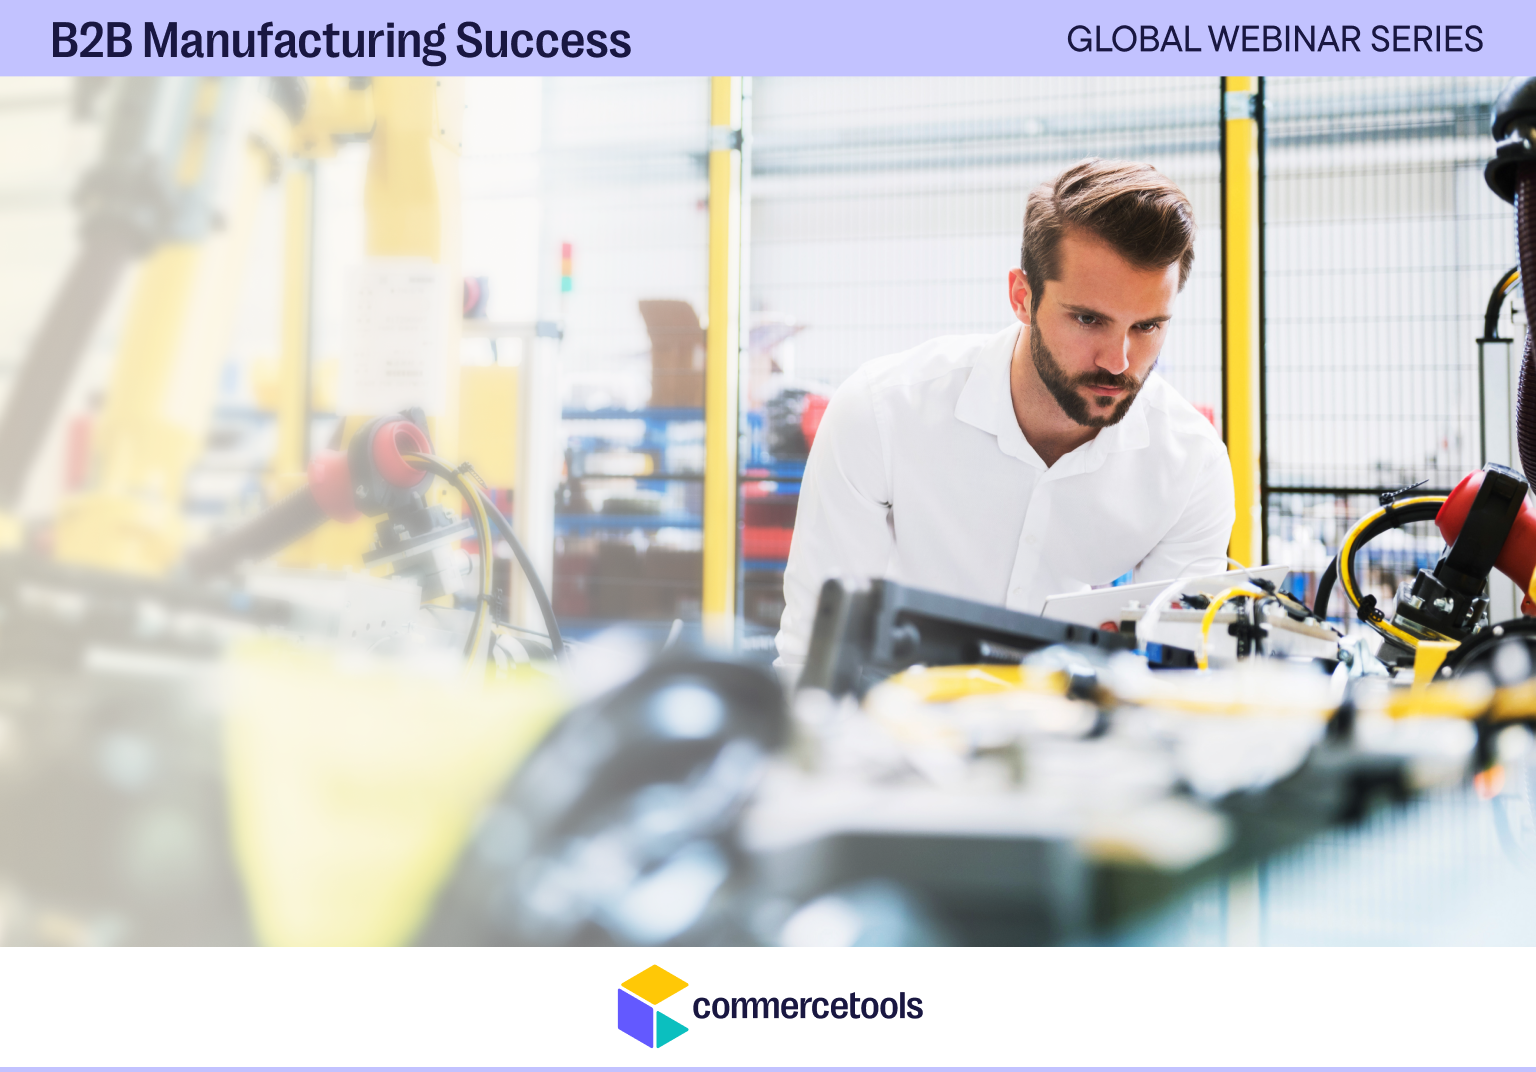 Accelerating B2B Manufacturing Success with Composable Commerce